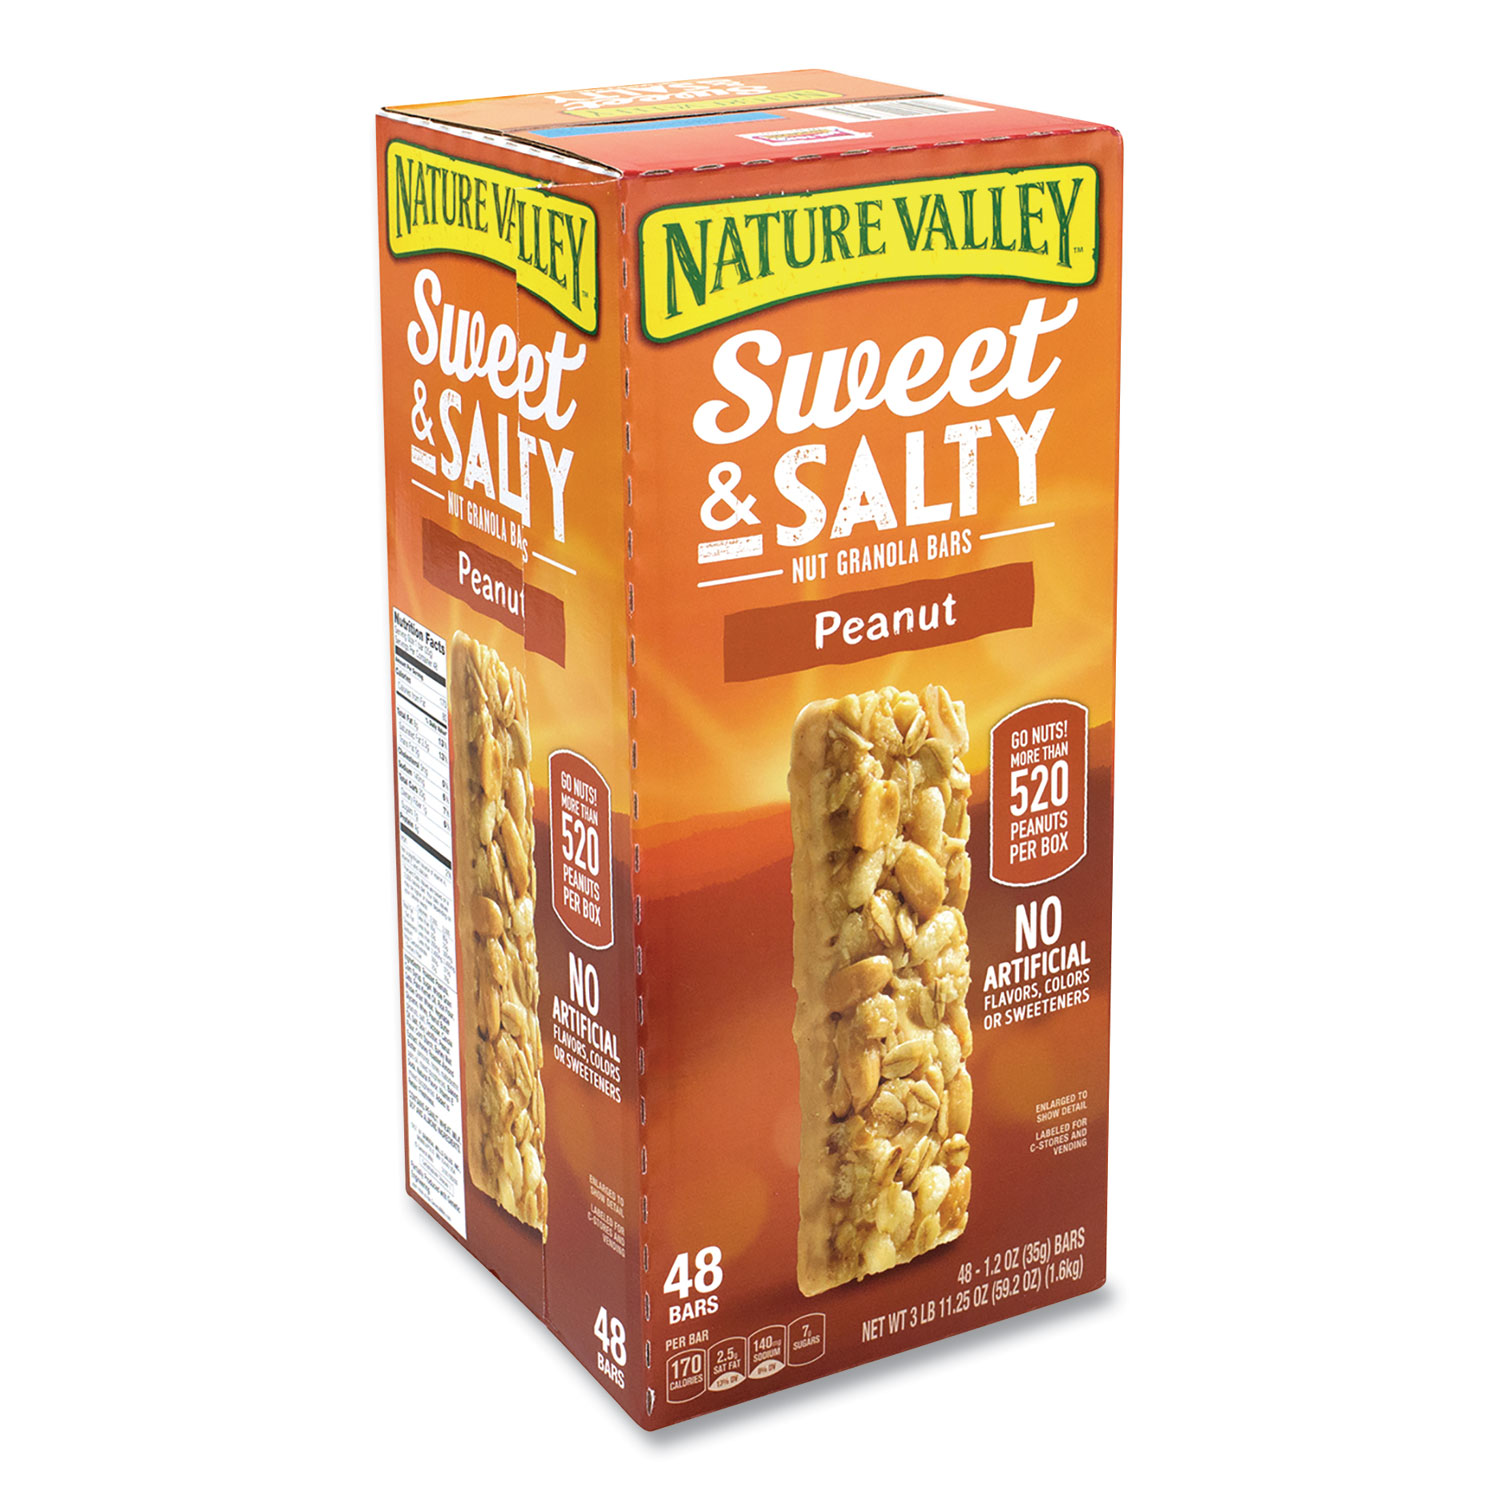  Nature Valley 21213 Granola Bars, Sweet and Salty Peanut, 1.2 oz Pouch, 48/Box, Free Delivery in 1-4 Business Days (GRR22000449) 